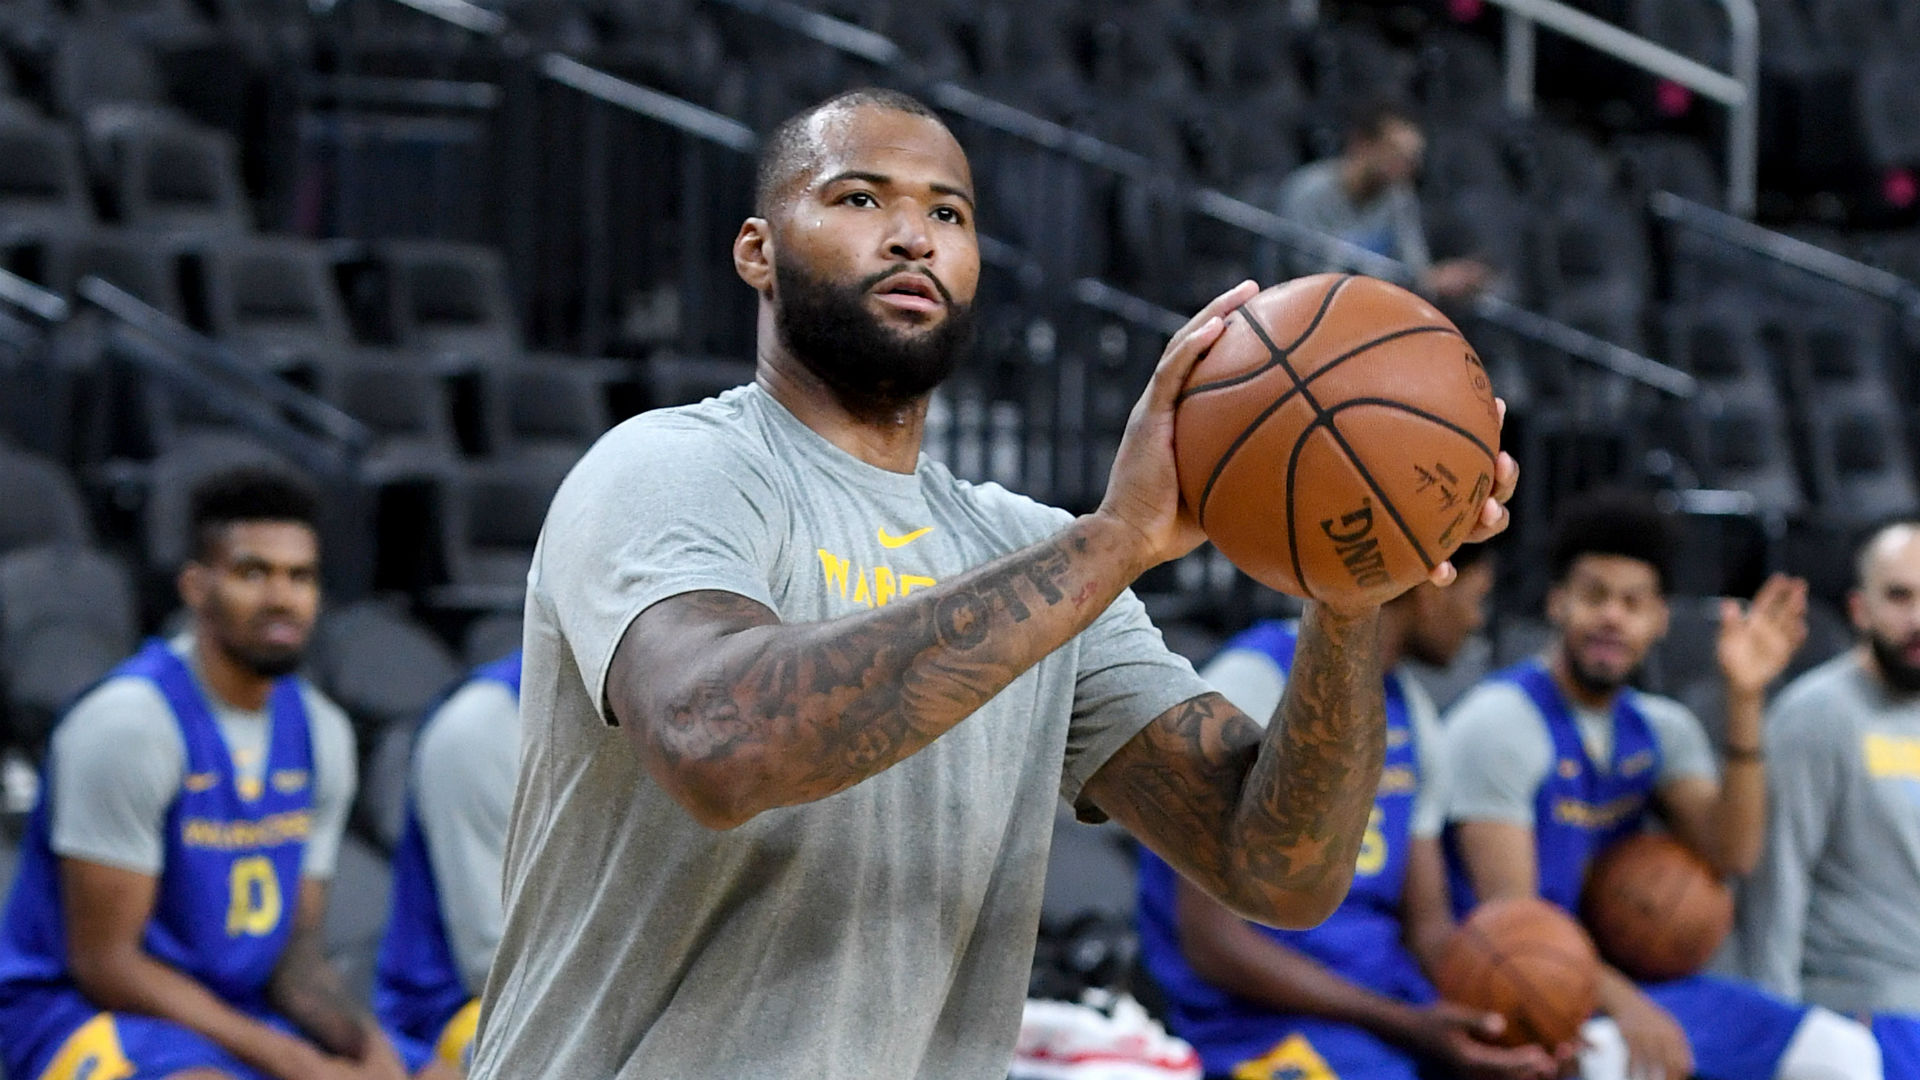 Los Angeles Lakers will be without their new signing DeMarcus Cousins, who has torn his anterior cruciate ligament.